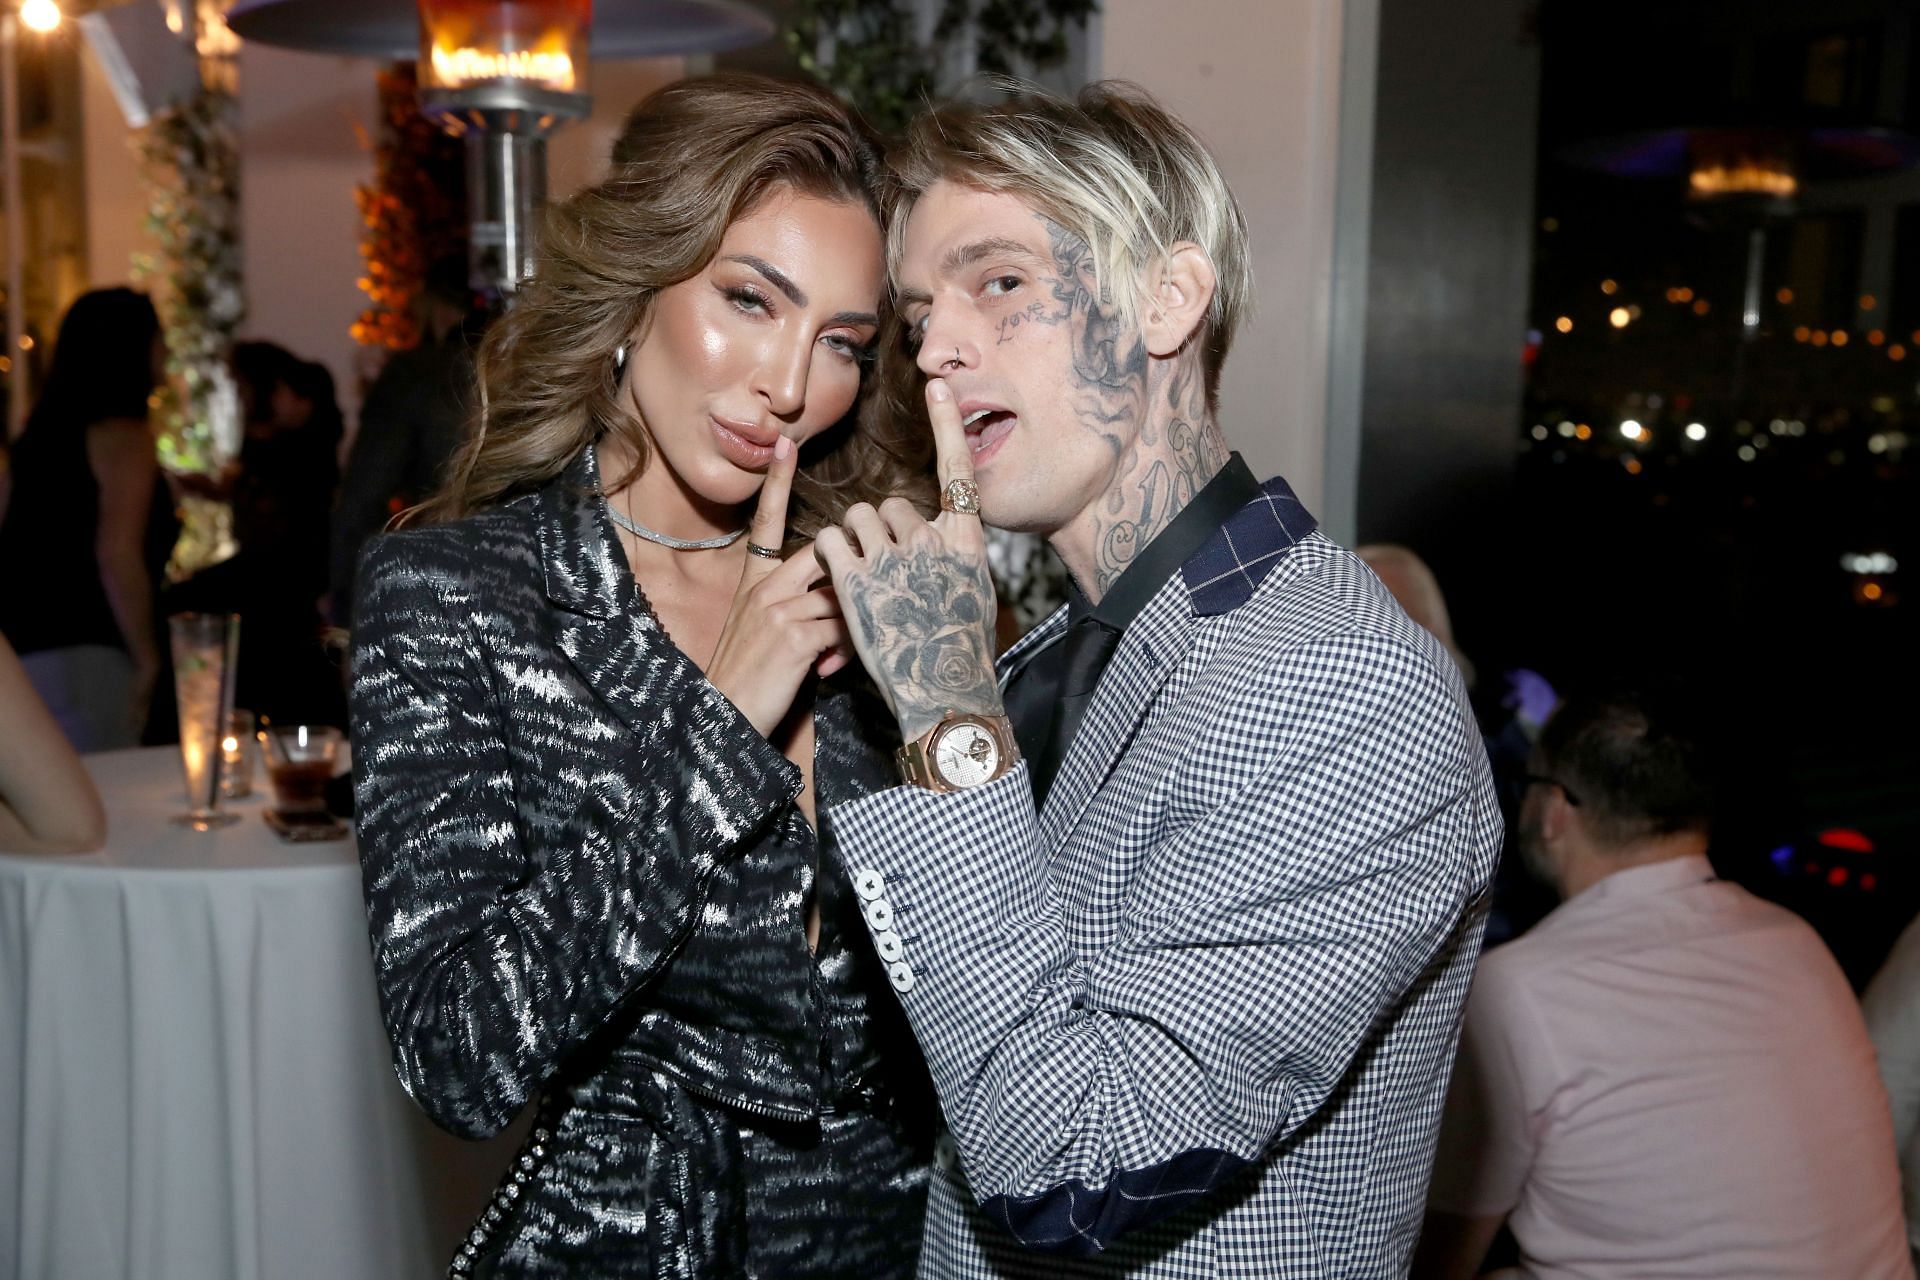 Farrah Abraham and Aaron Carter (Image via Randy Shropshire/Getty Images)